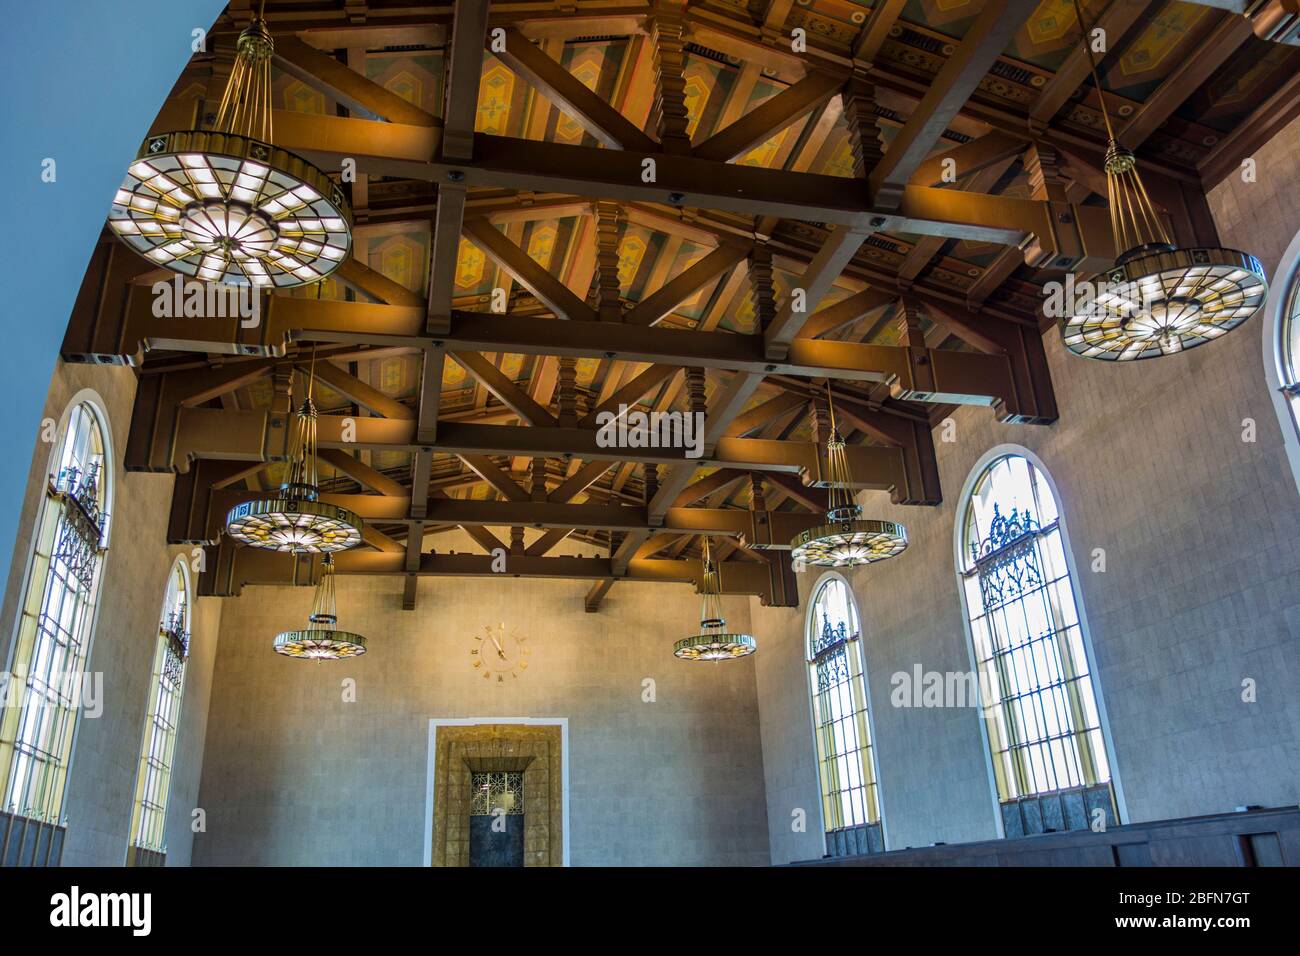 Ceiling and chandeliers in Union Station, Los Angeles, California, USA Stock Photo